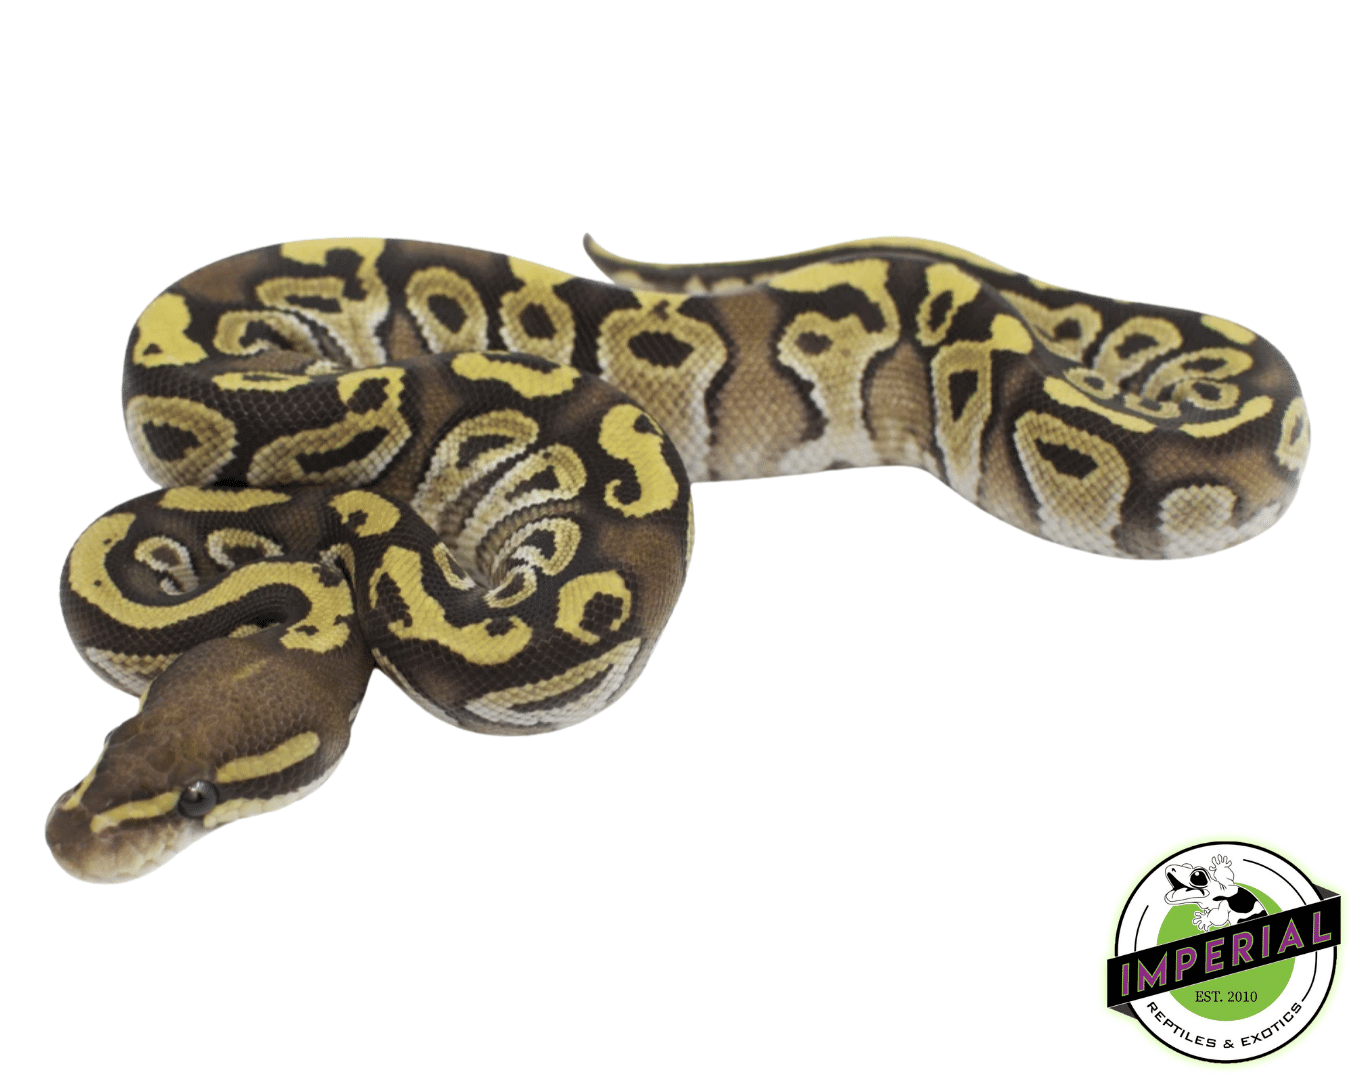 mojave ball python for sale, buy reptiles online